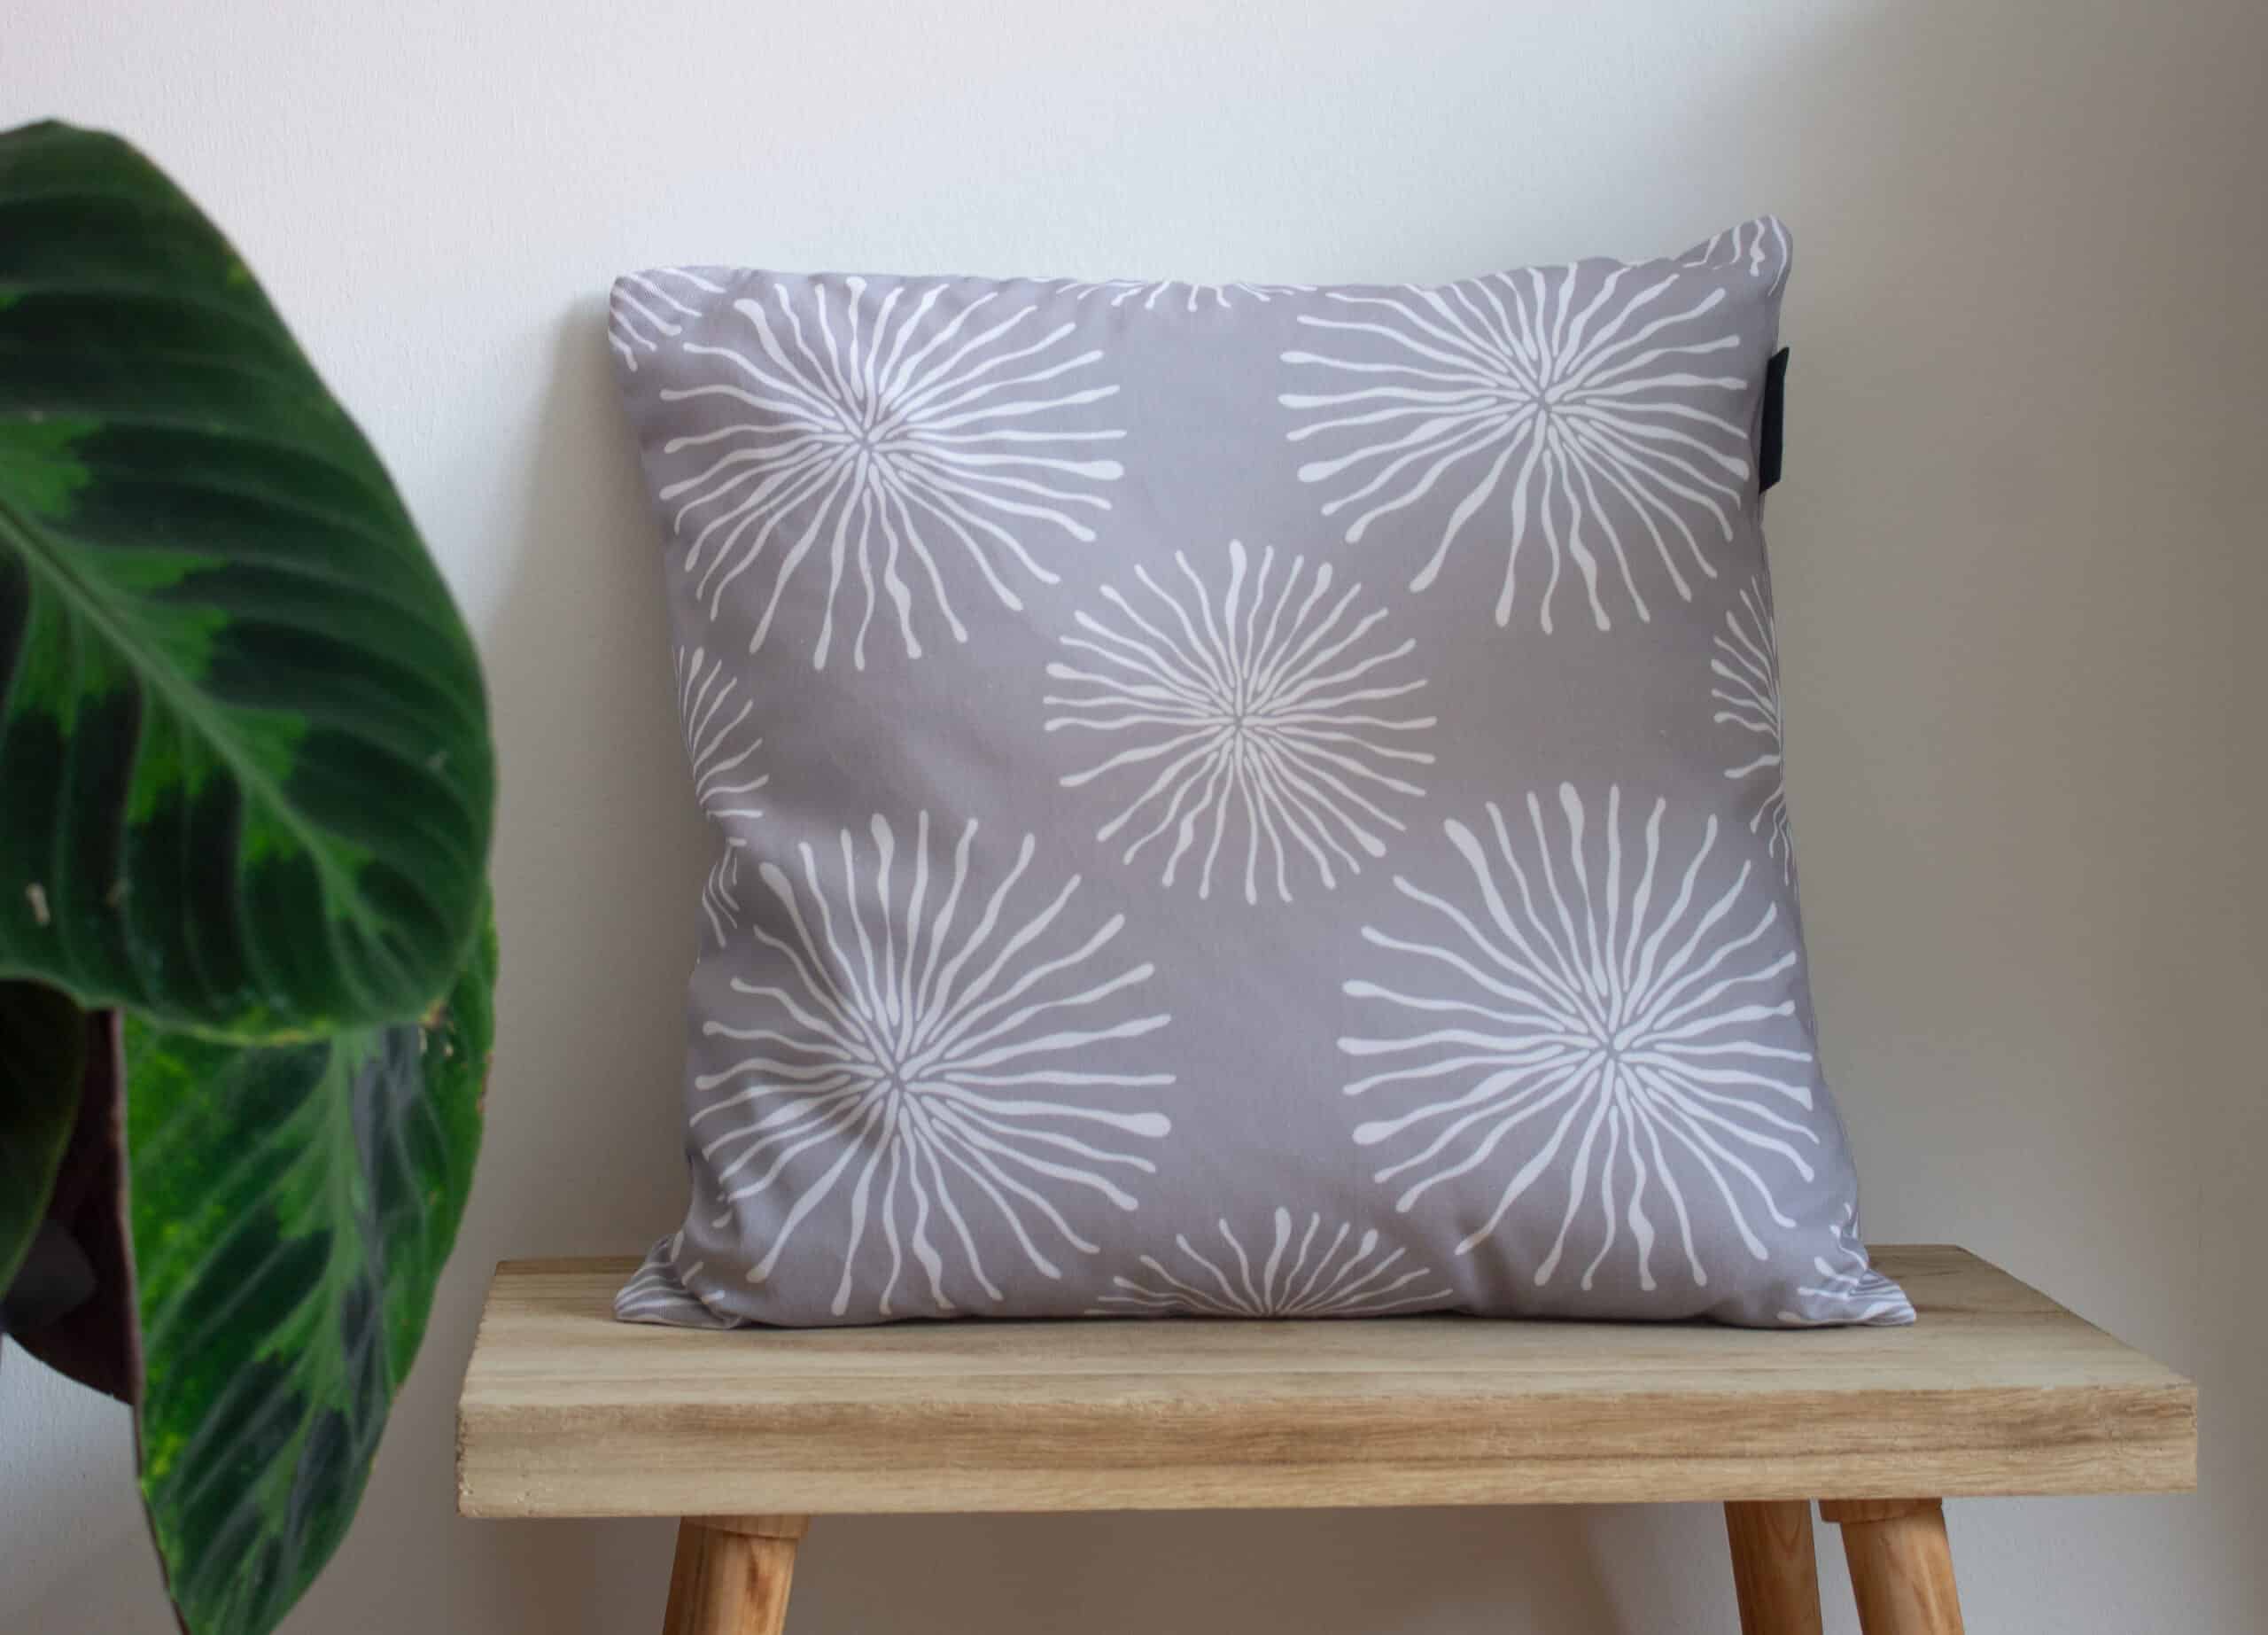 Grey Throw cushion with white circular pattern design on a bench with a plant